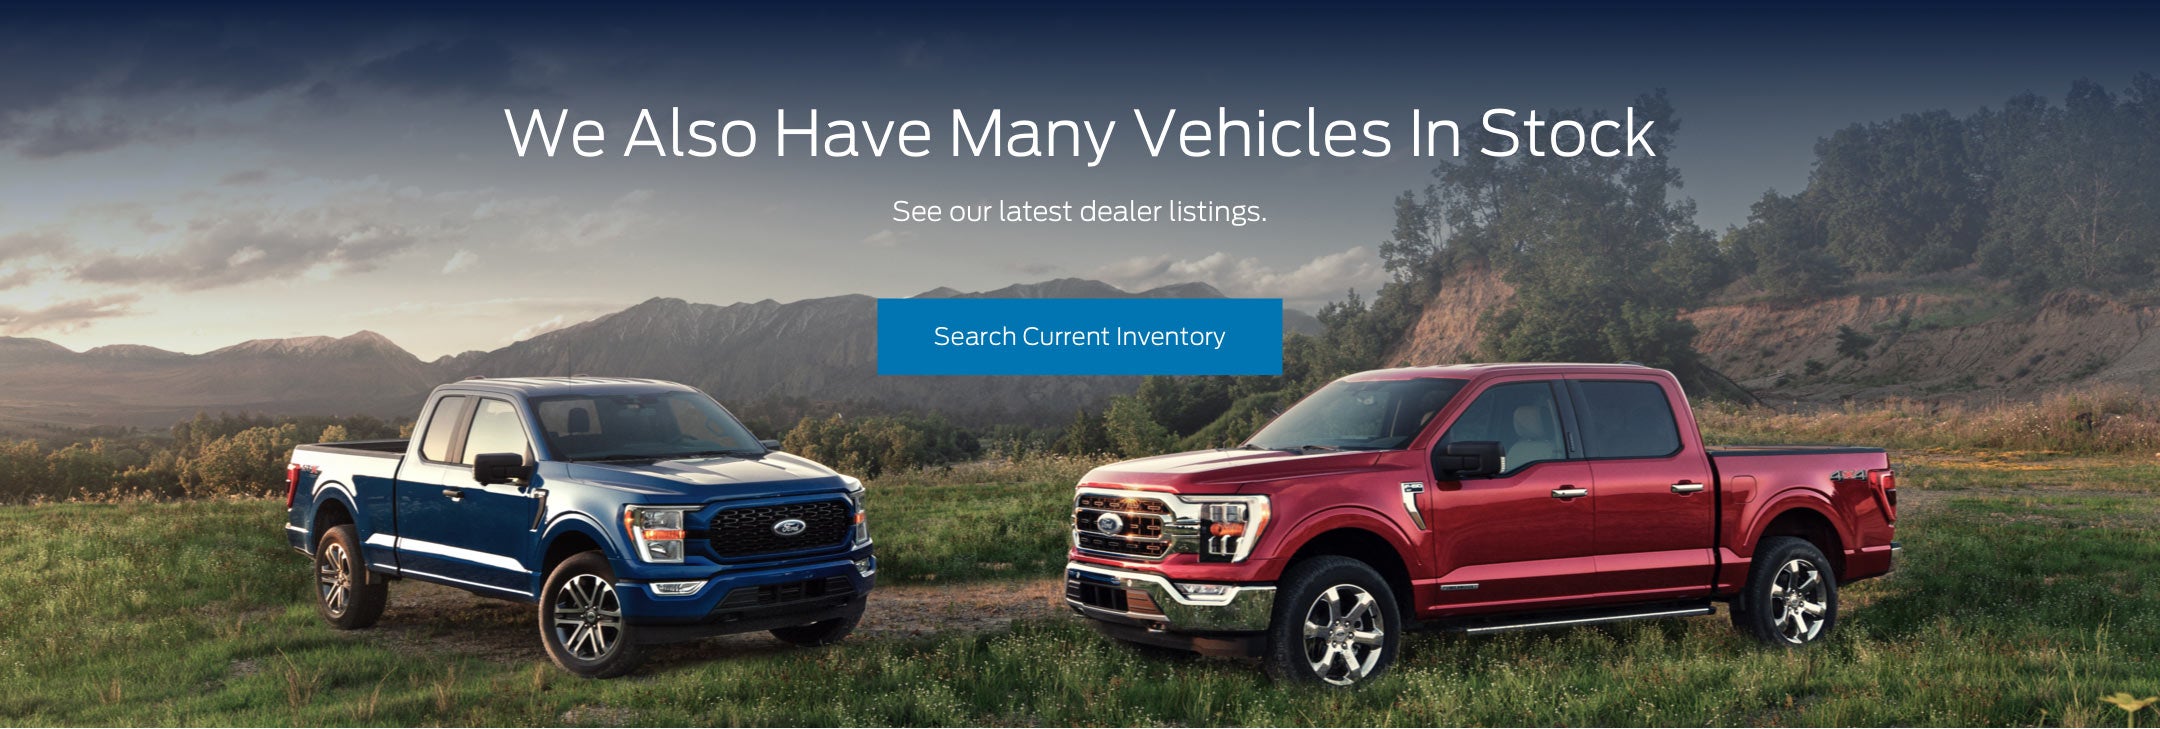 Ford vehicles in stock | Janssen and Sons Ford in Holdrege NE